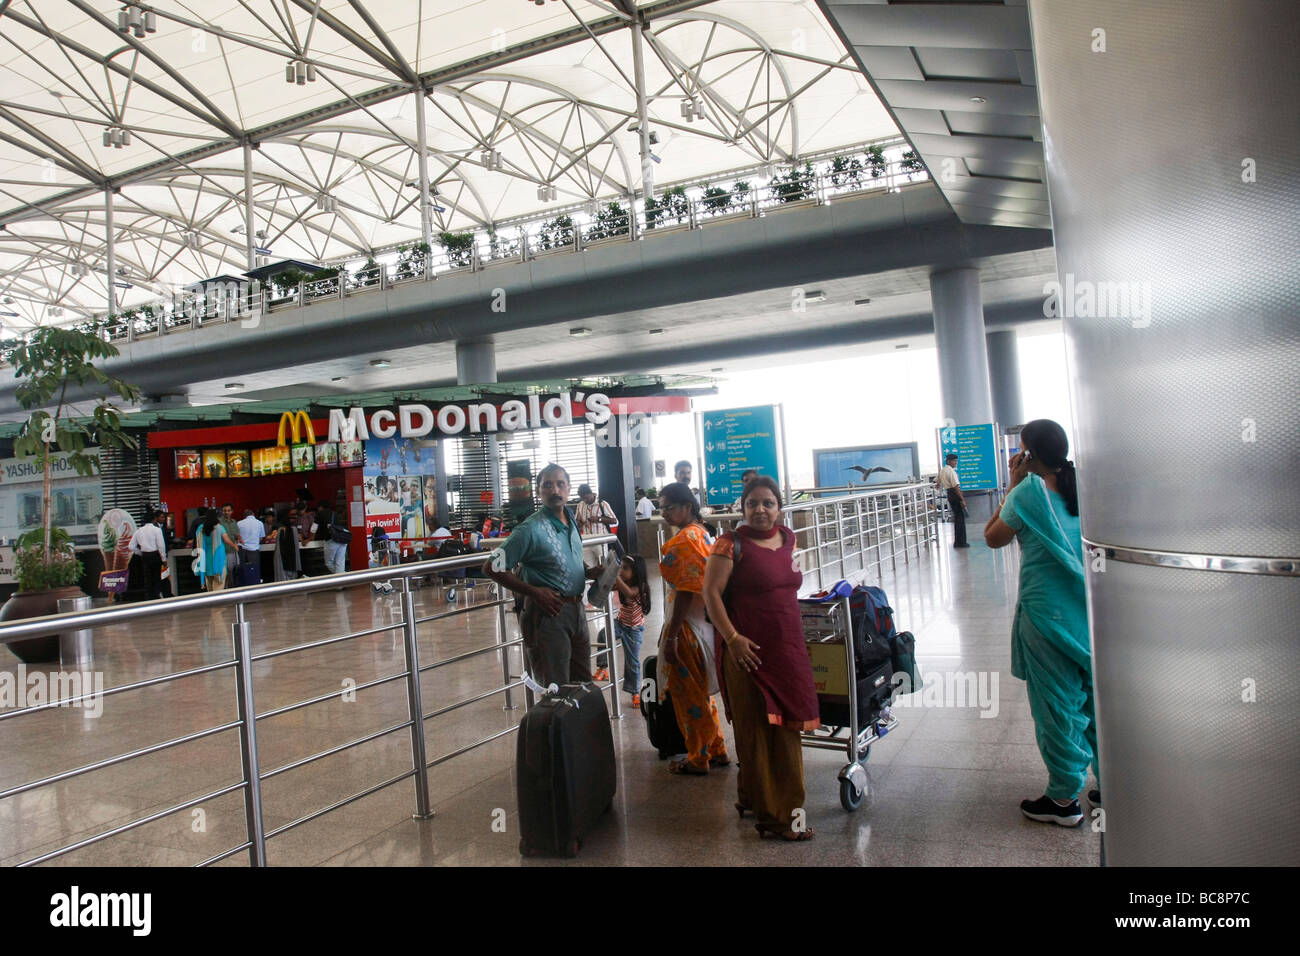 Passangers and a McDonalds restaurant outside the arrival terminal at Rajiv Gandhi international airport in Hyderabad in India Stock Photo